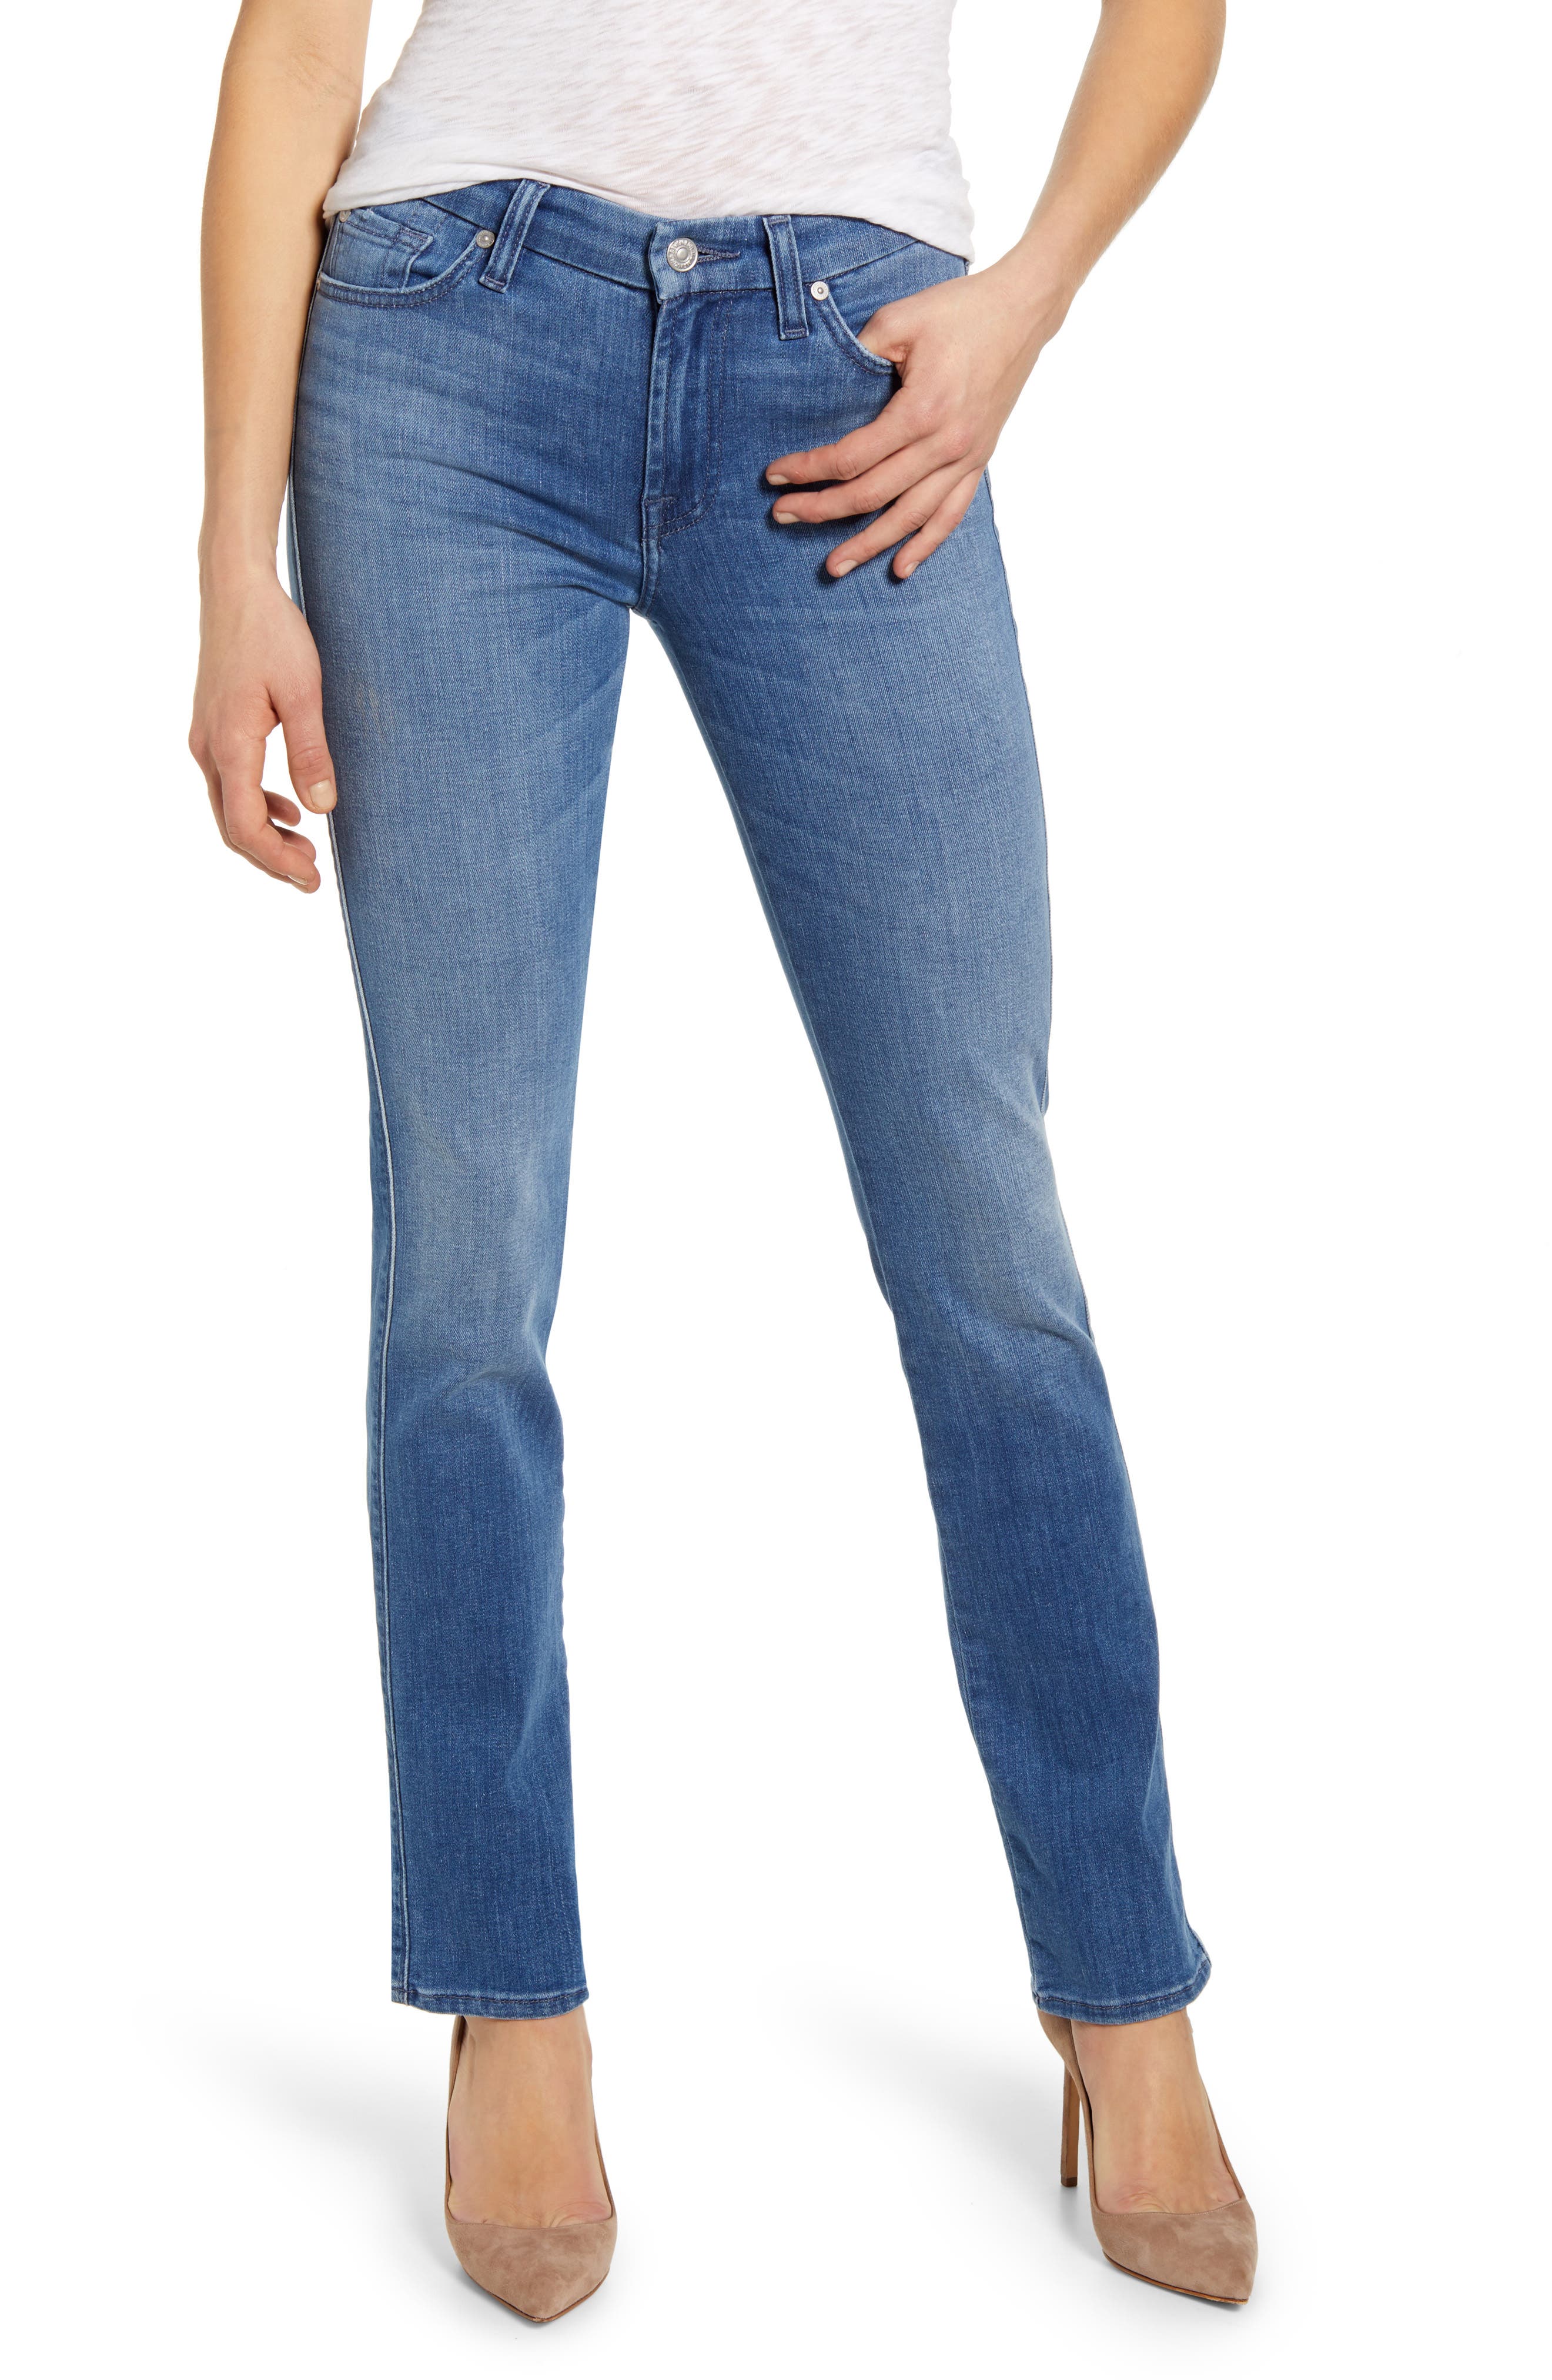 Women's 7 For All Mankind Kimmie Straight Leg Jeans